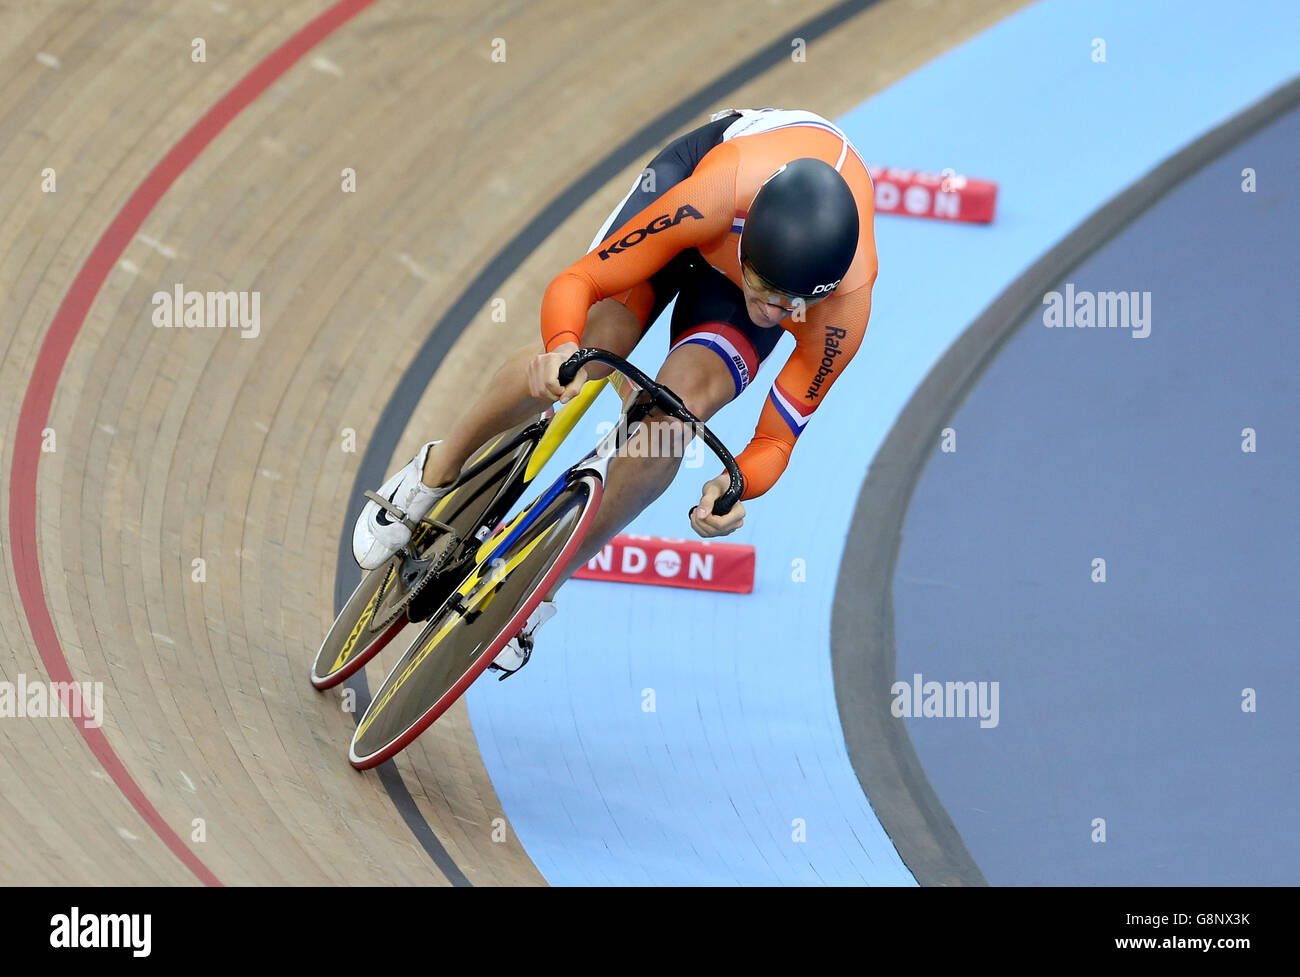 The Netherland's Theo Bos competes in the Men's Sprint during day three of the UCI Track Cycling World Championships at Lee Valley VeloPark, London. PRESS ASSOCIATION Photo. Picture date: Friday March 4, 2016. See PA story CYCLING World. Photo credit should read: Tim Goode/PA Wire. Stock Photo